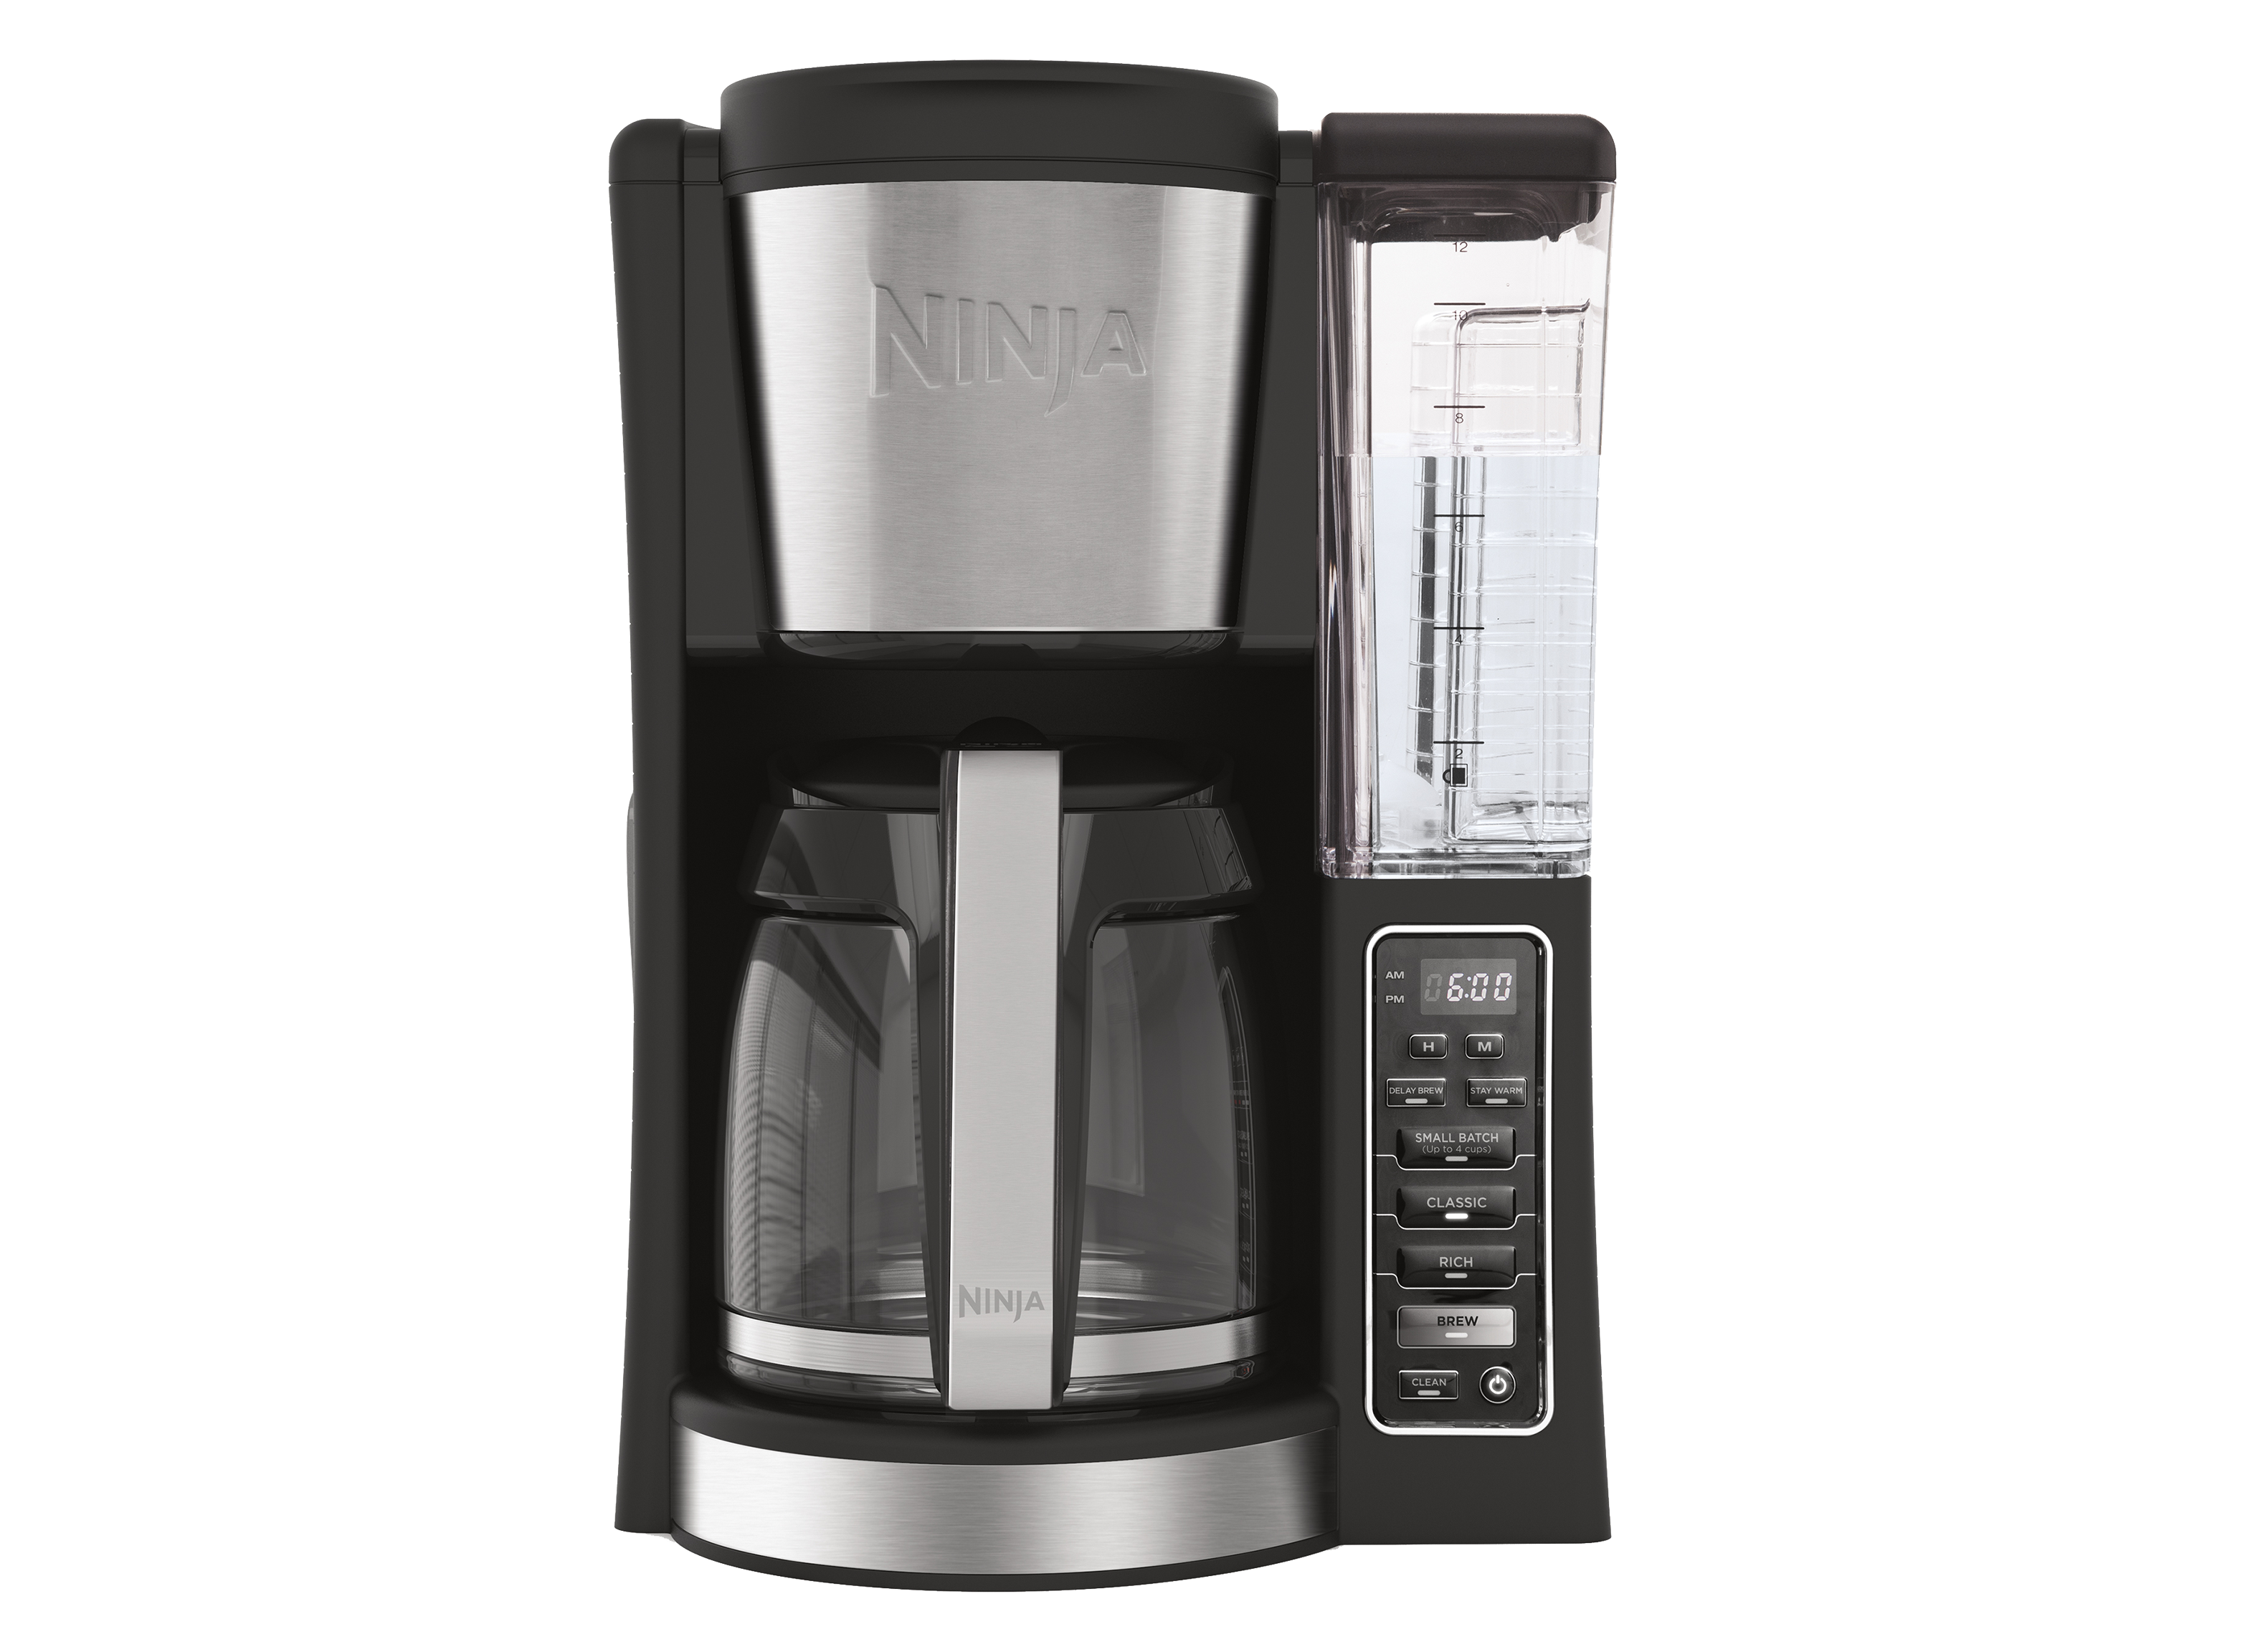 https://crdms.images.consumerreports.org/prod/products/cr/models/397680-drip-coffee-makers-ninja-12-cup-programmable-ce201-10002616.png